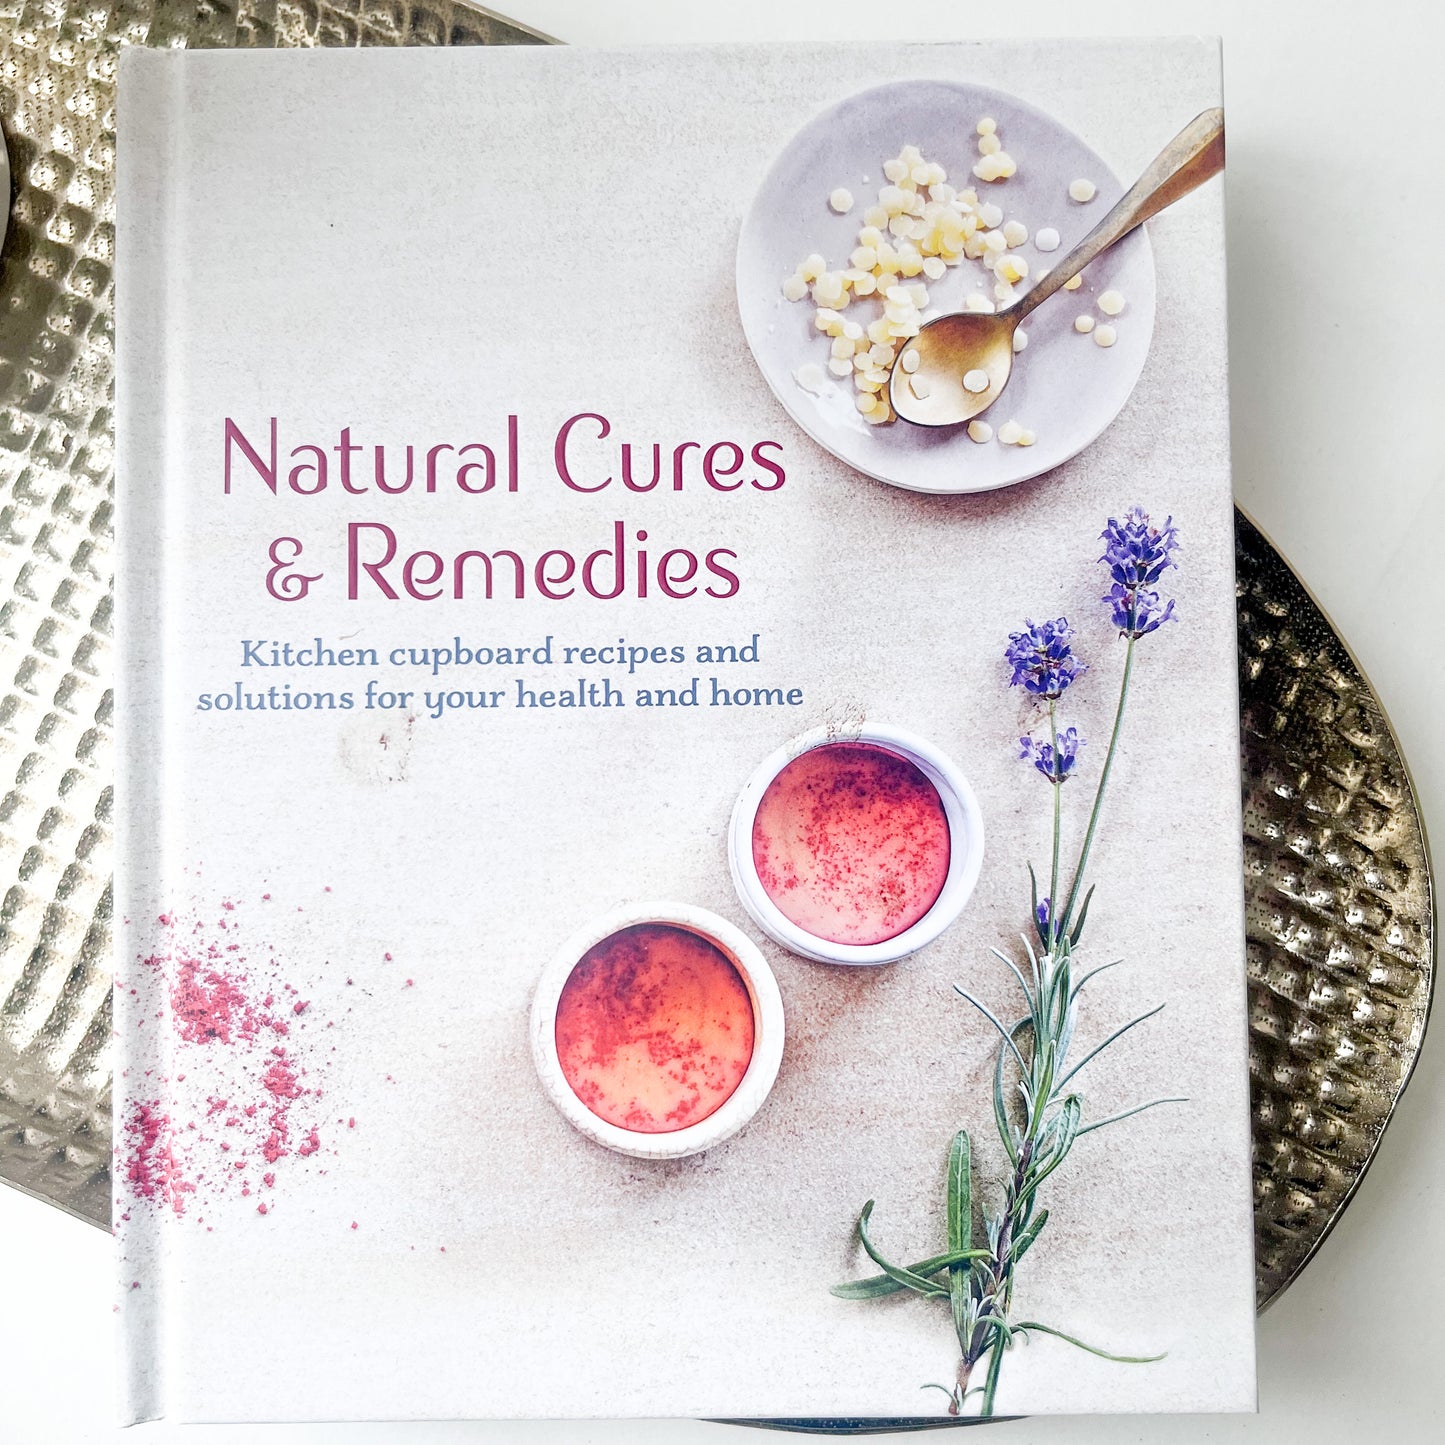 Natural Cures & Remedies Book - CICO Books